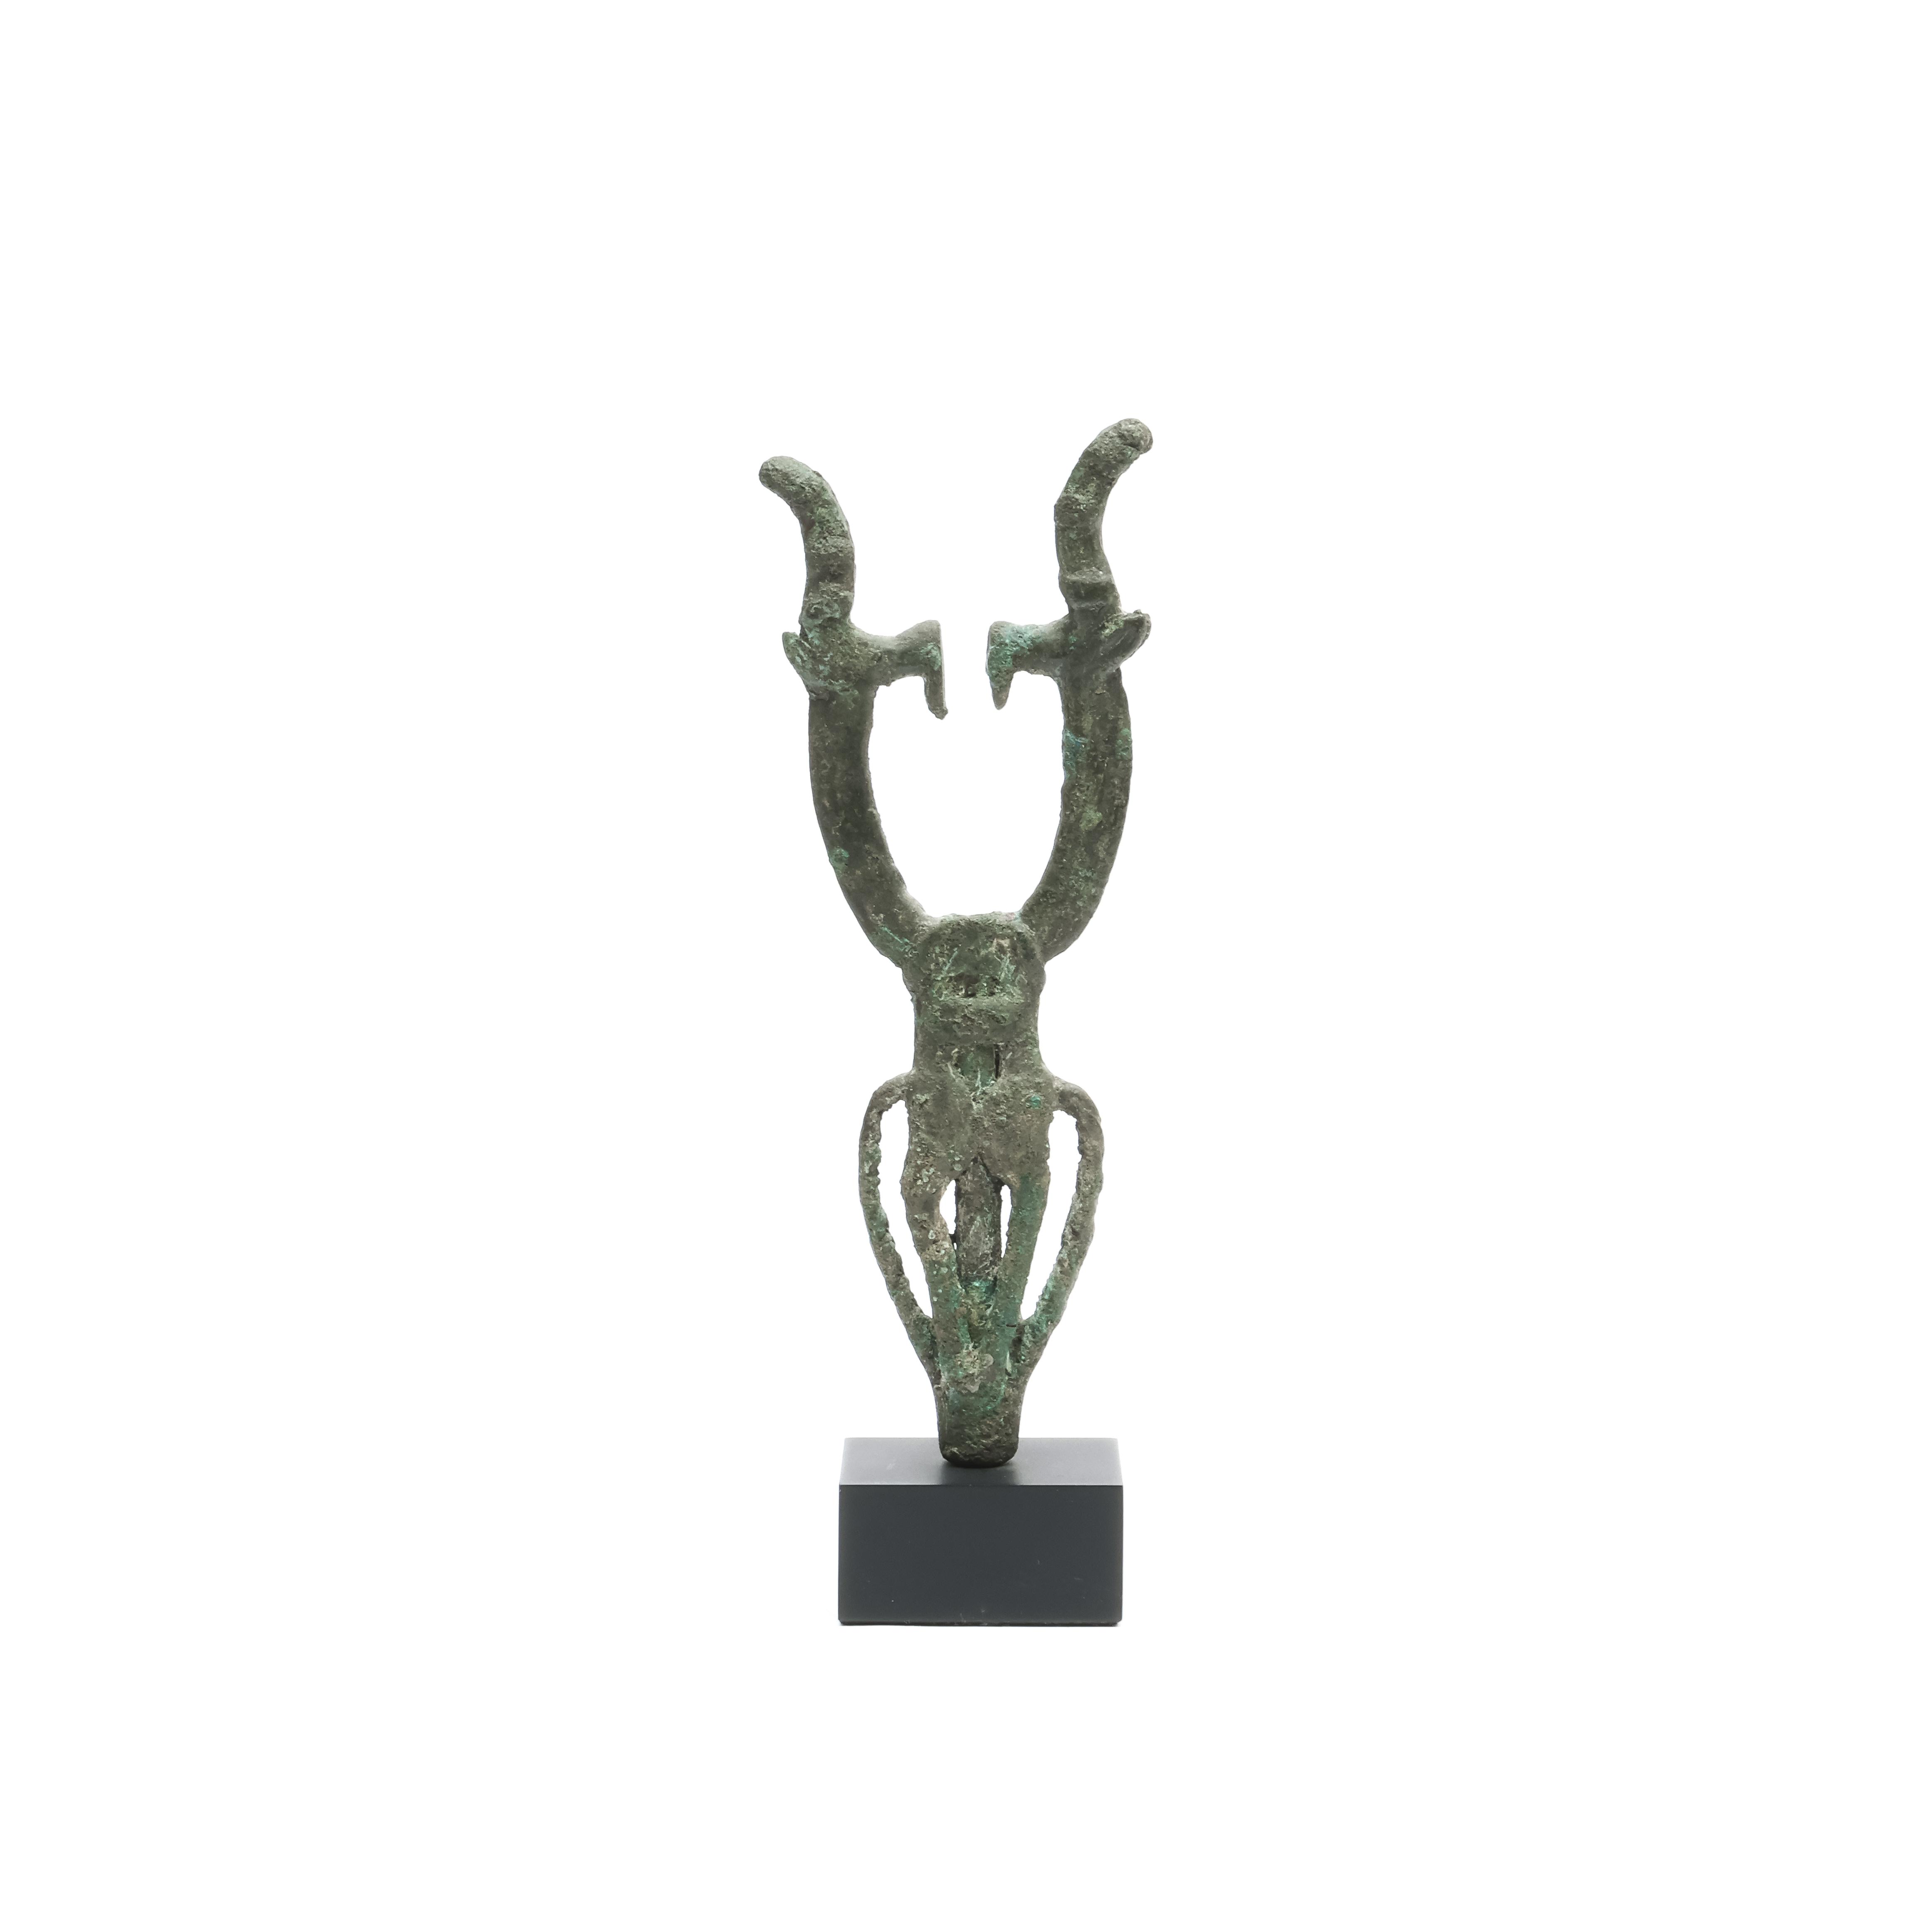 Luristan, bronze final in the shape of two rampant goats, ca. 800-600 BC. - Image 2 of 2